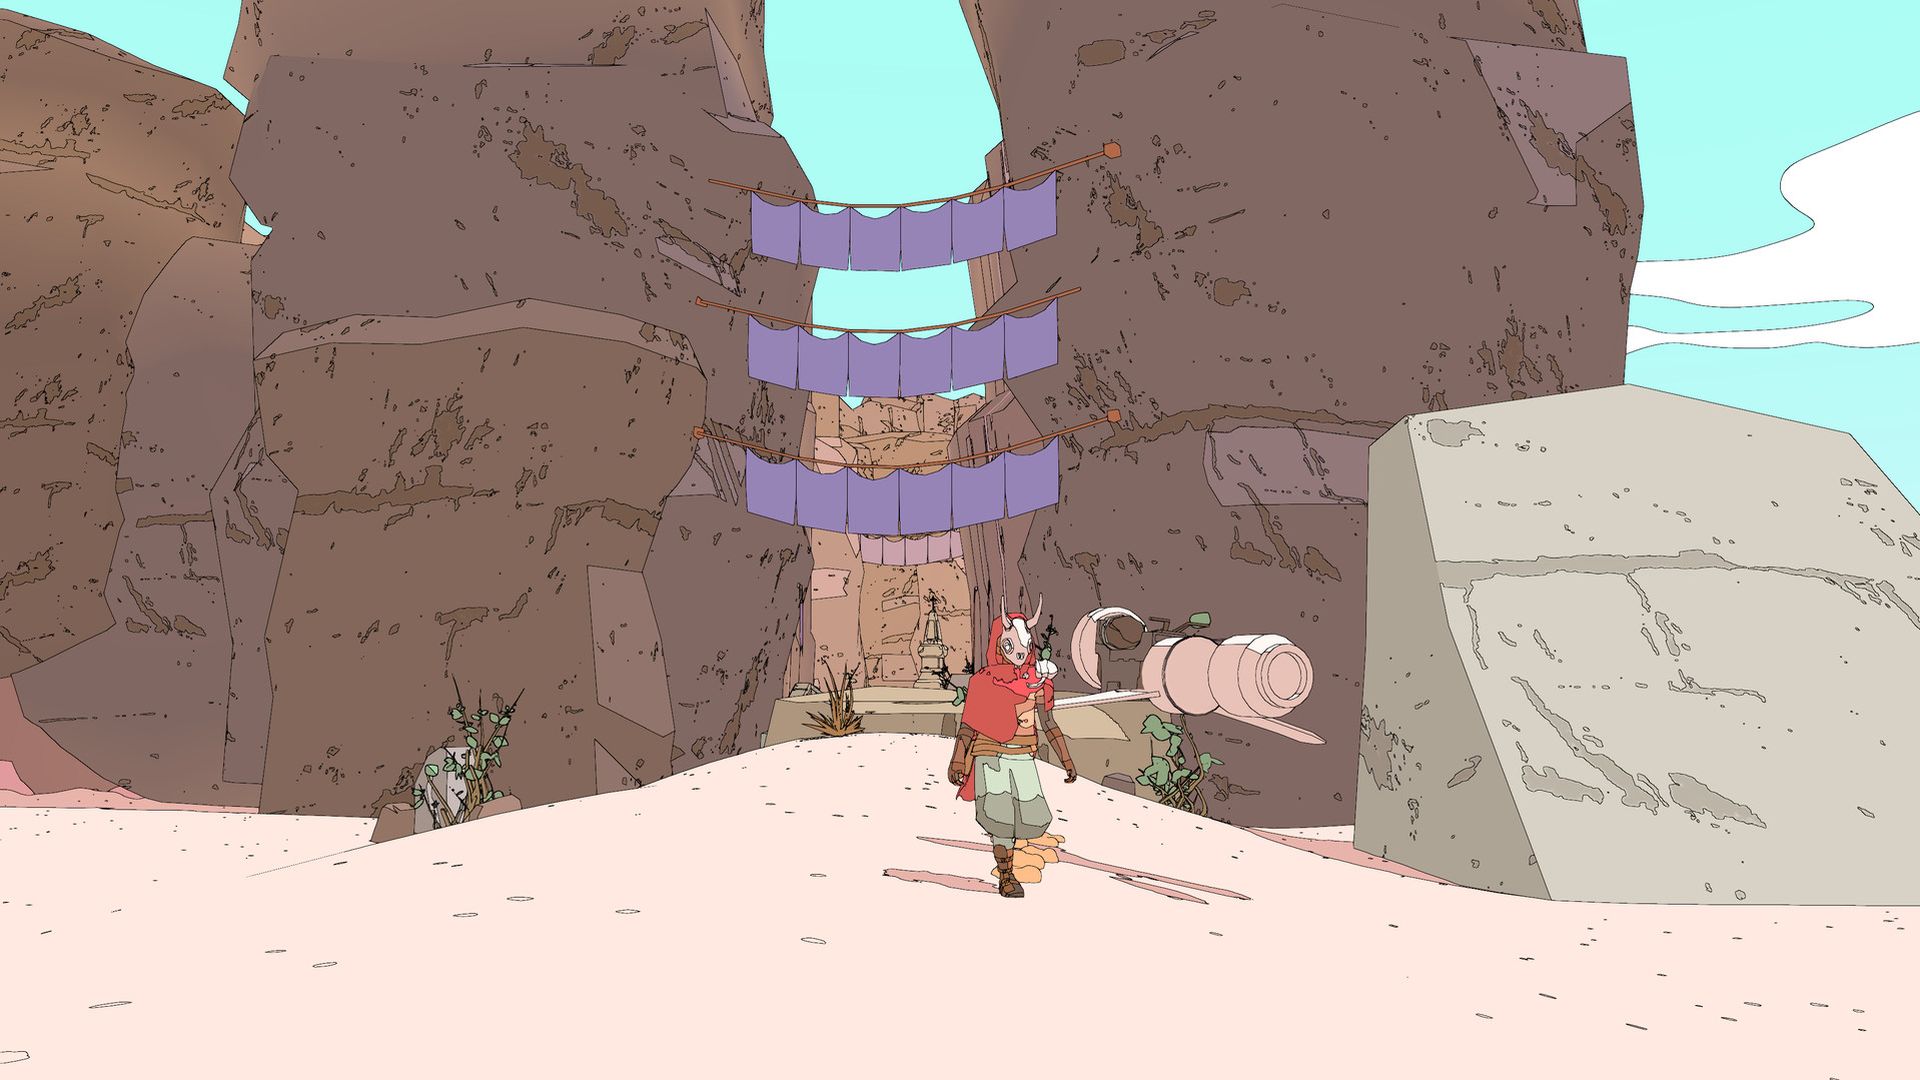 A video game character covered in a helmet and cloak walks through a desert